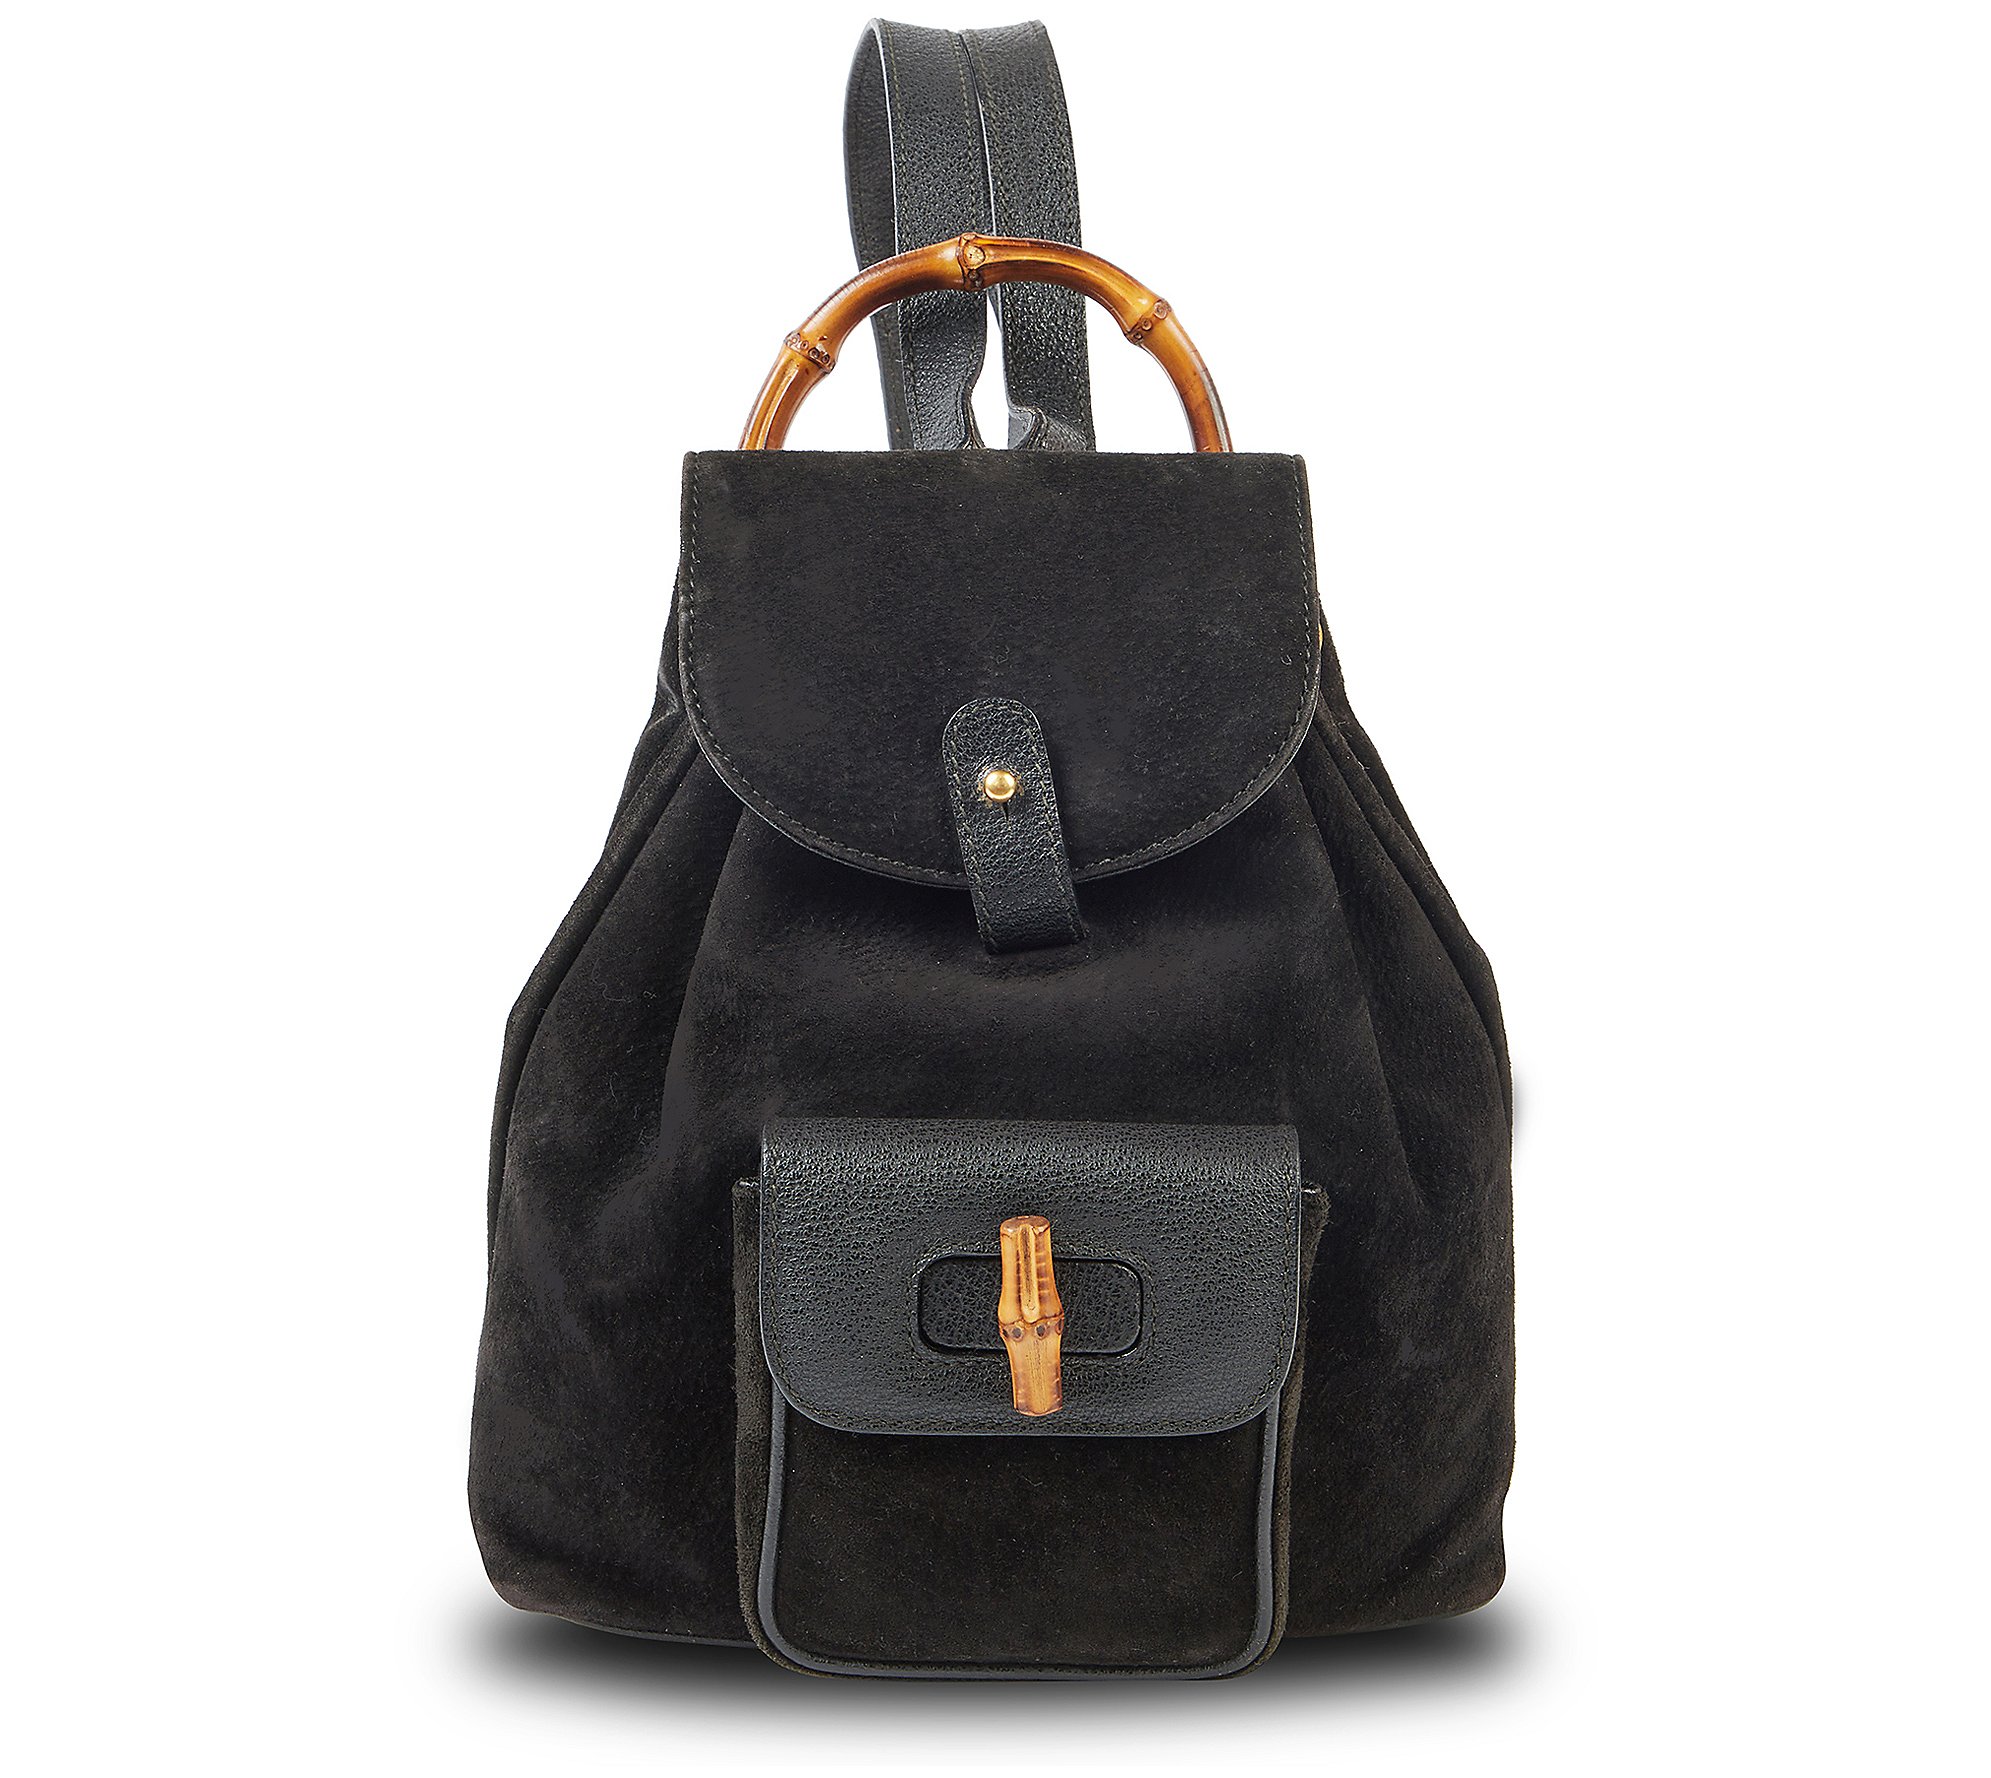 Pre-Owned Gucci Bamboo Suede Backpack